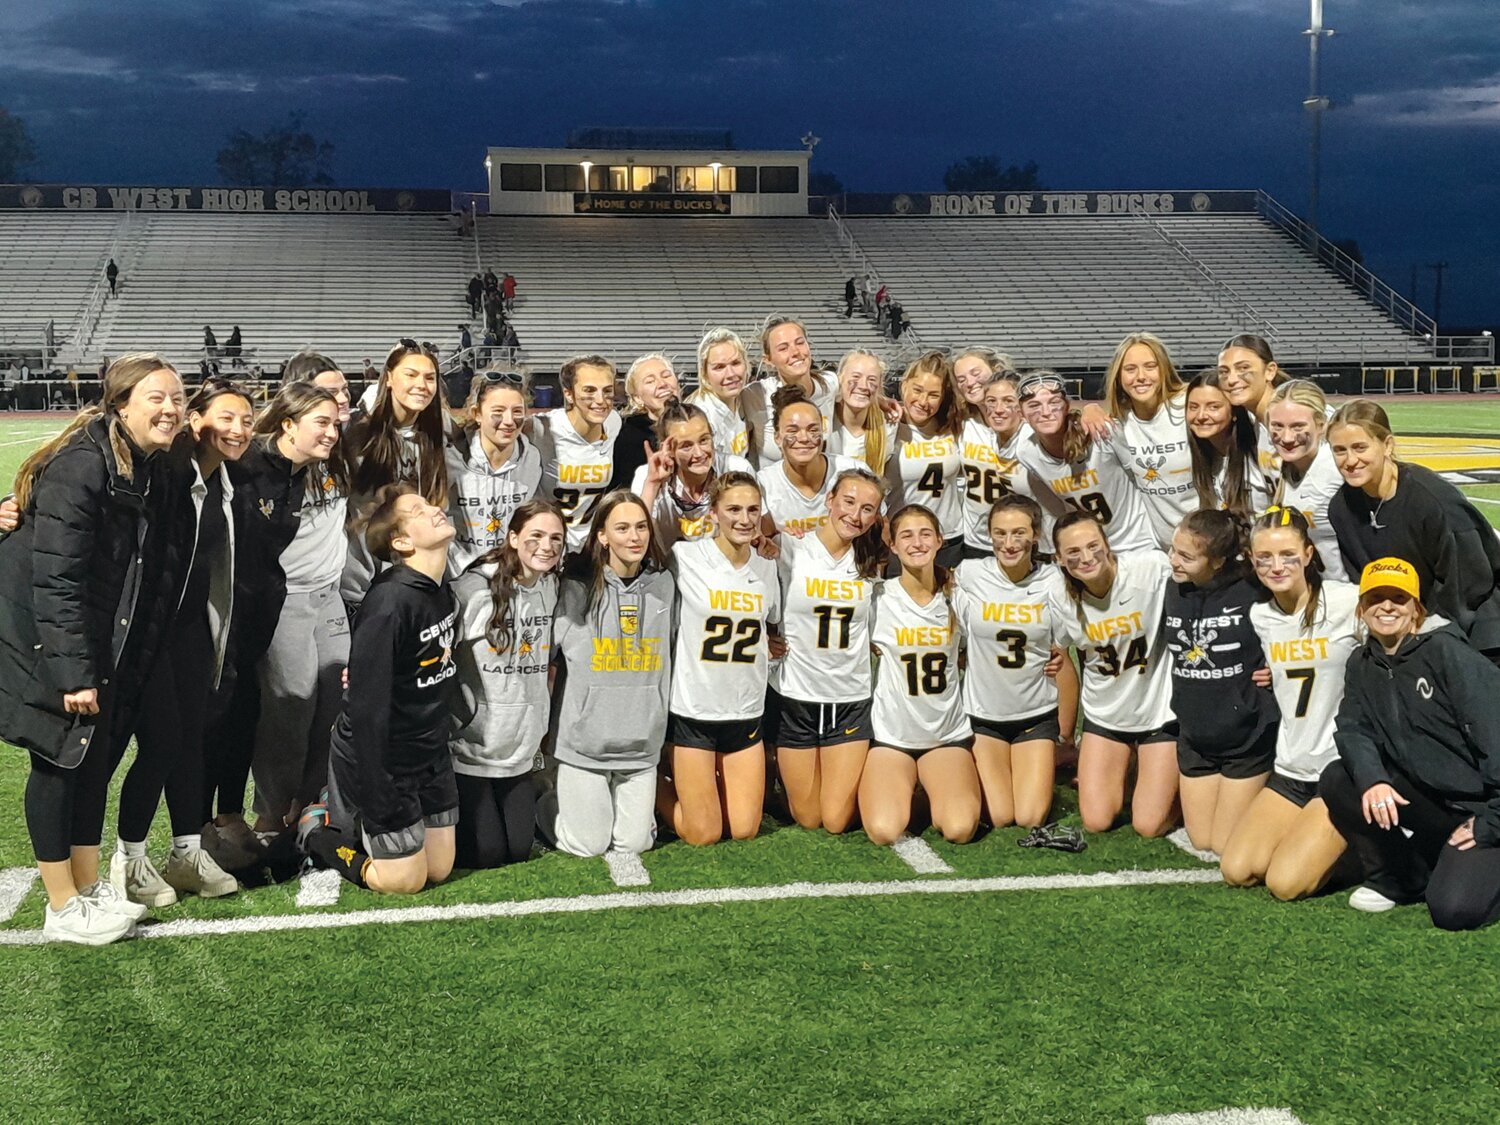 The Central Bucks West girls lacrosse team topped rival Central Bucks East 16-3 Tuesday night for its fourth consecutive win.